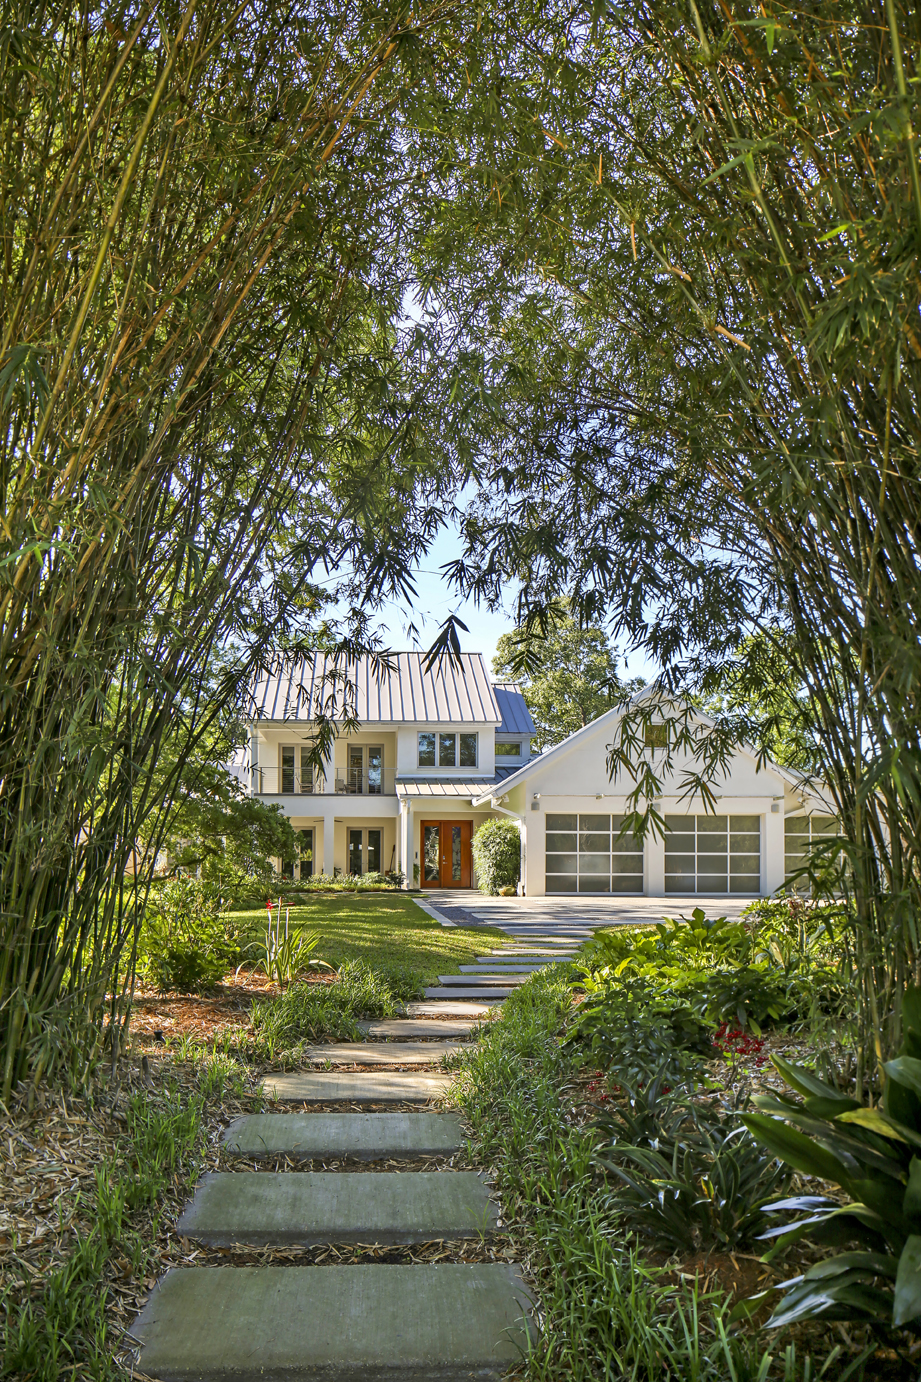 Mature bamboo offers ample privacy for this contemporary home in the heart of town. Landscape architect Bill Rountree handled the landscape design. Architect Lionel Bailey still included porches and overhangs—a nod to Southern style—but made it more simplistic in keeping with the sleek design the homeowners craved.